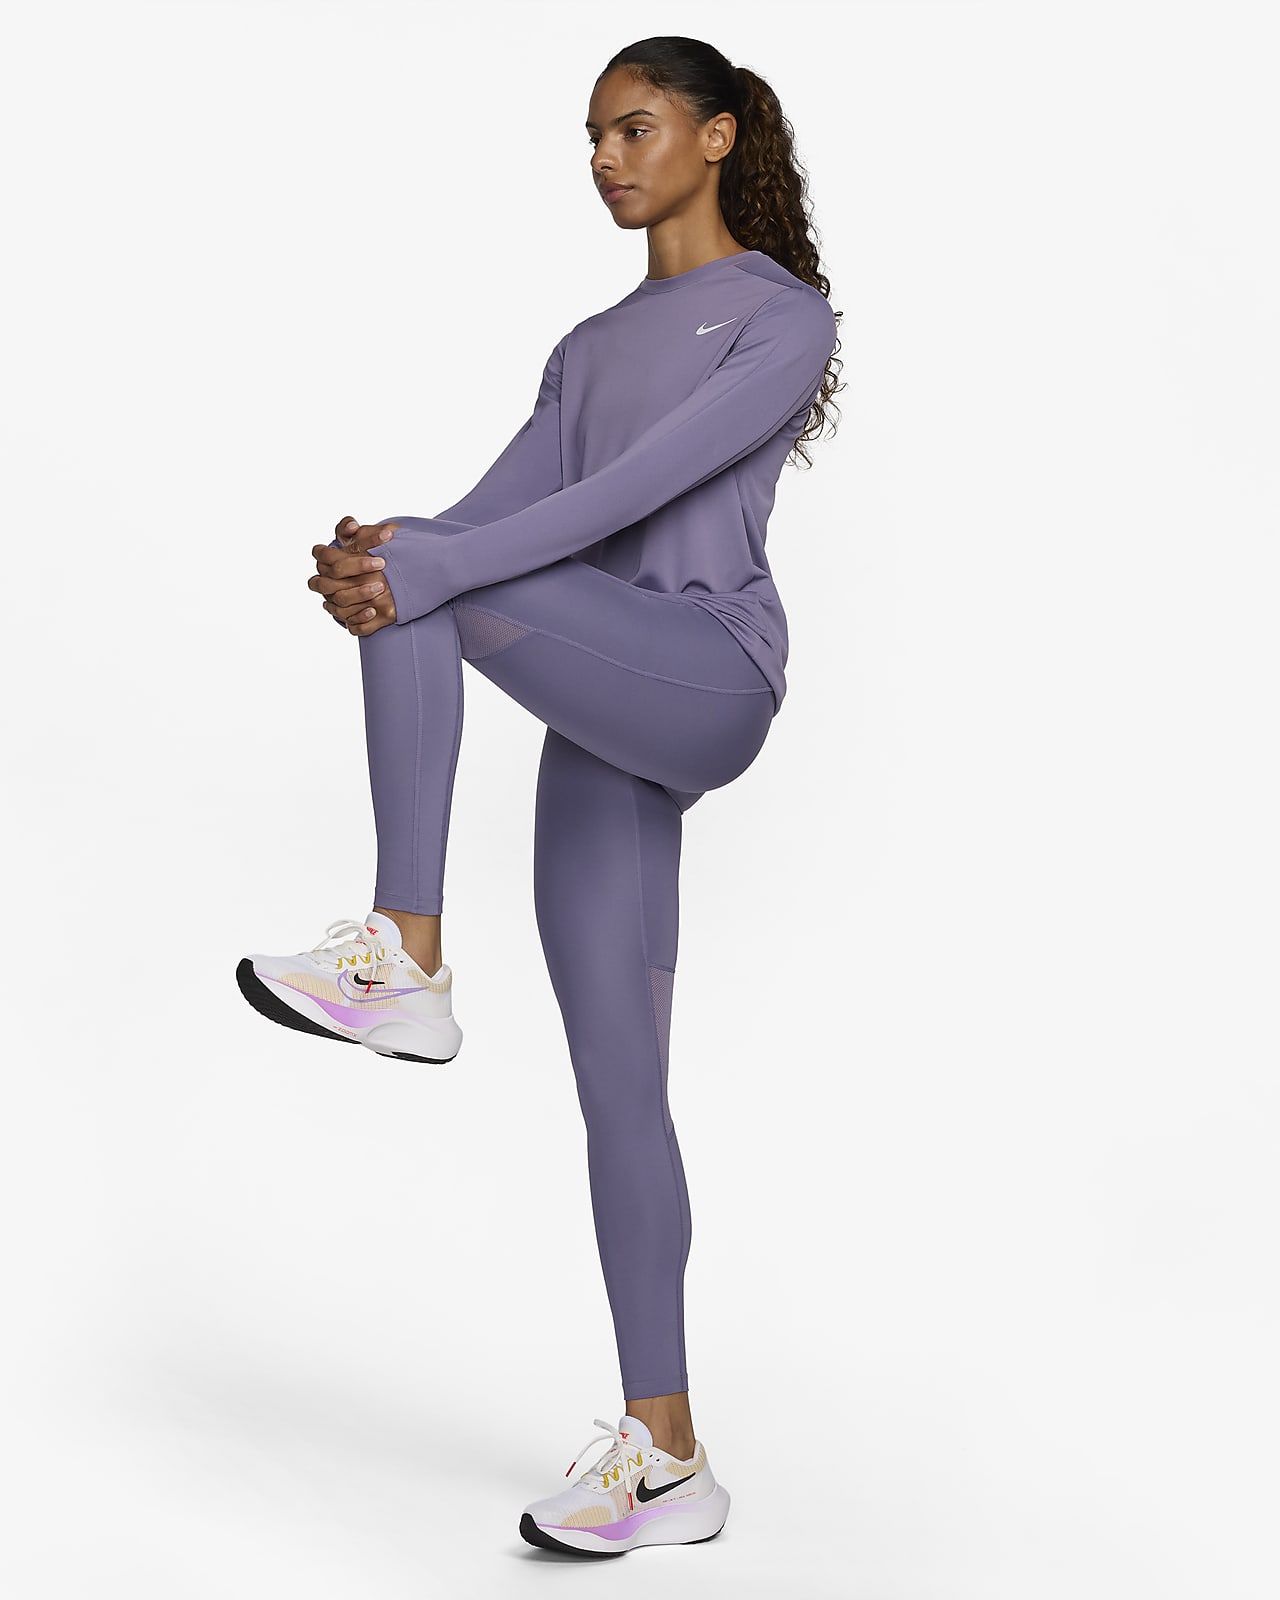 Nike Epic Fast Mid-Rise Running Tights, Tights